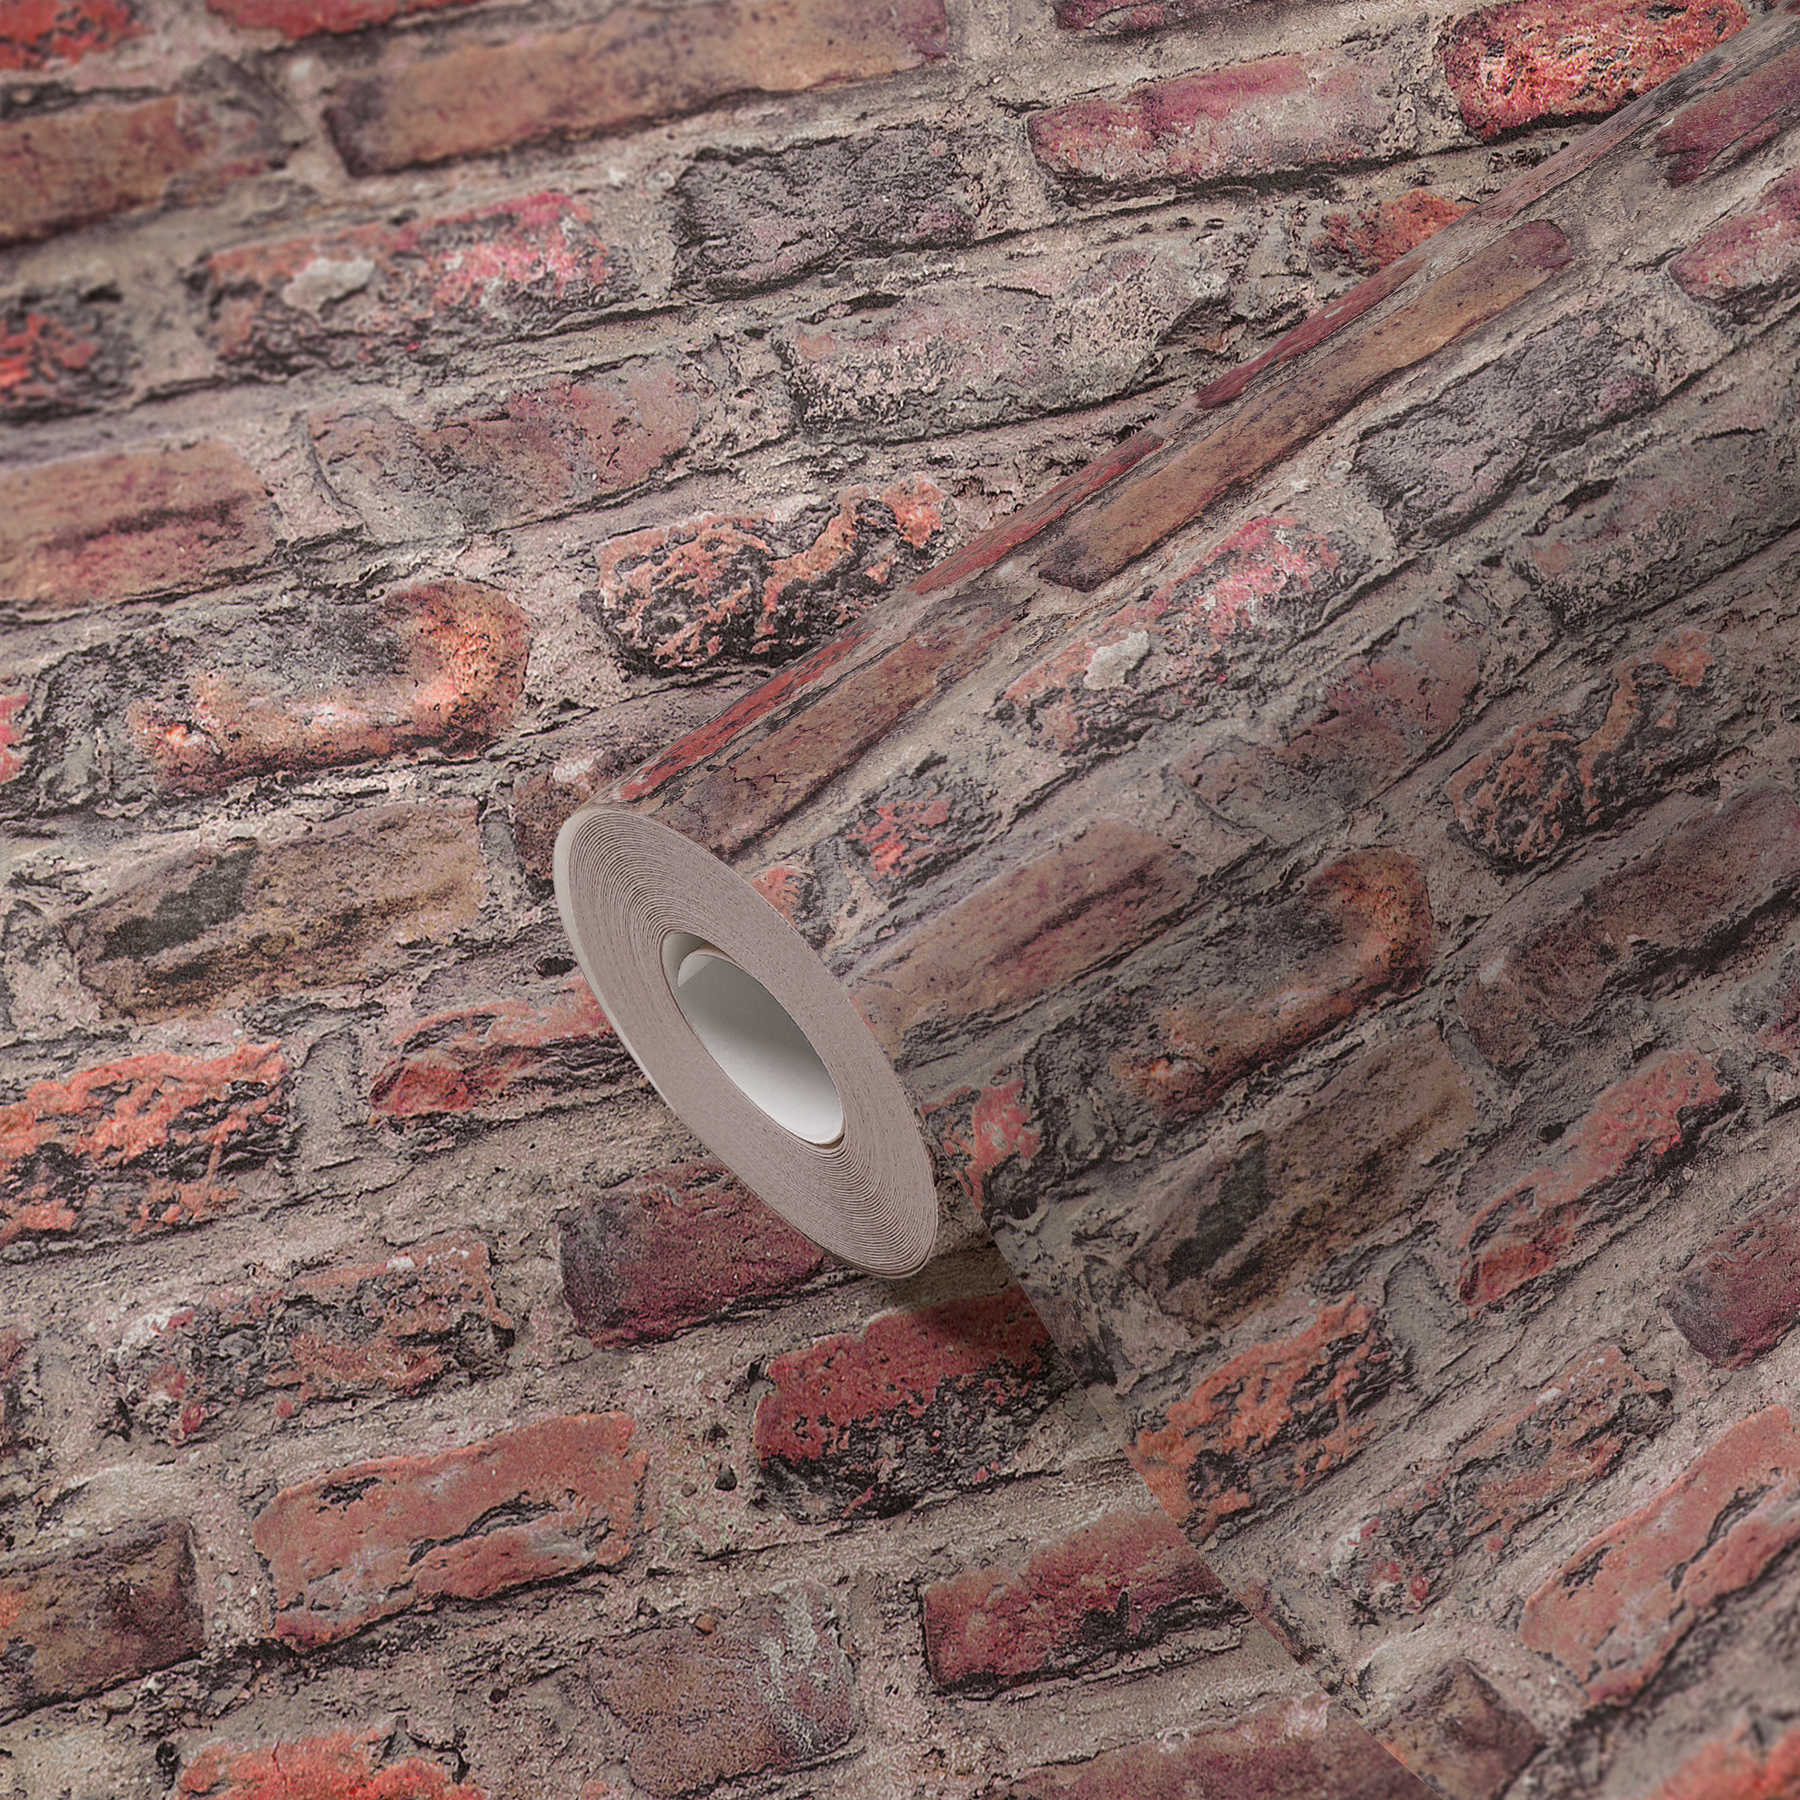             Non-woven wallpaper with brick wall design - red, brown
        